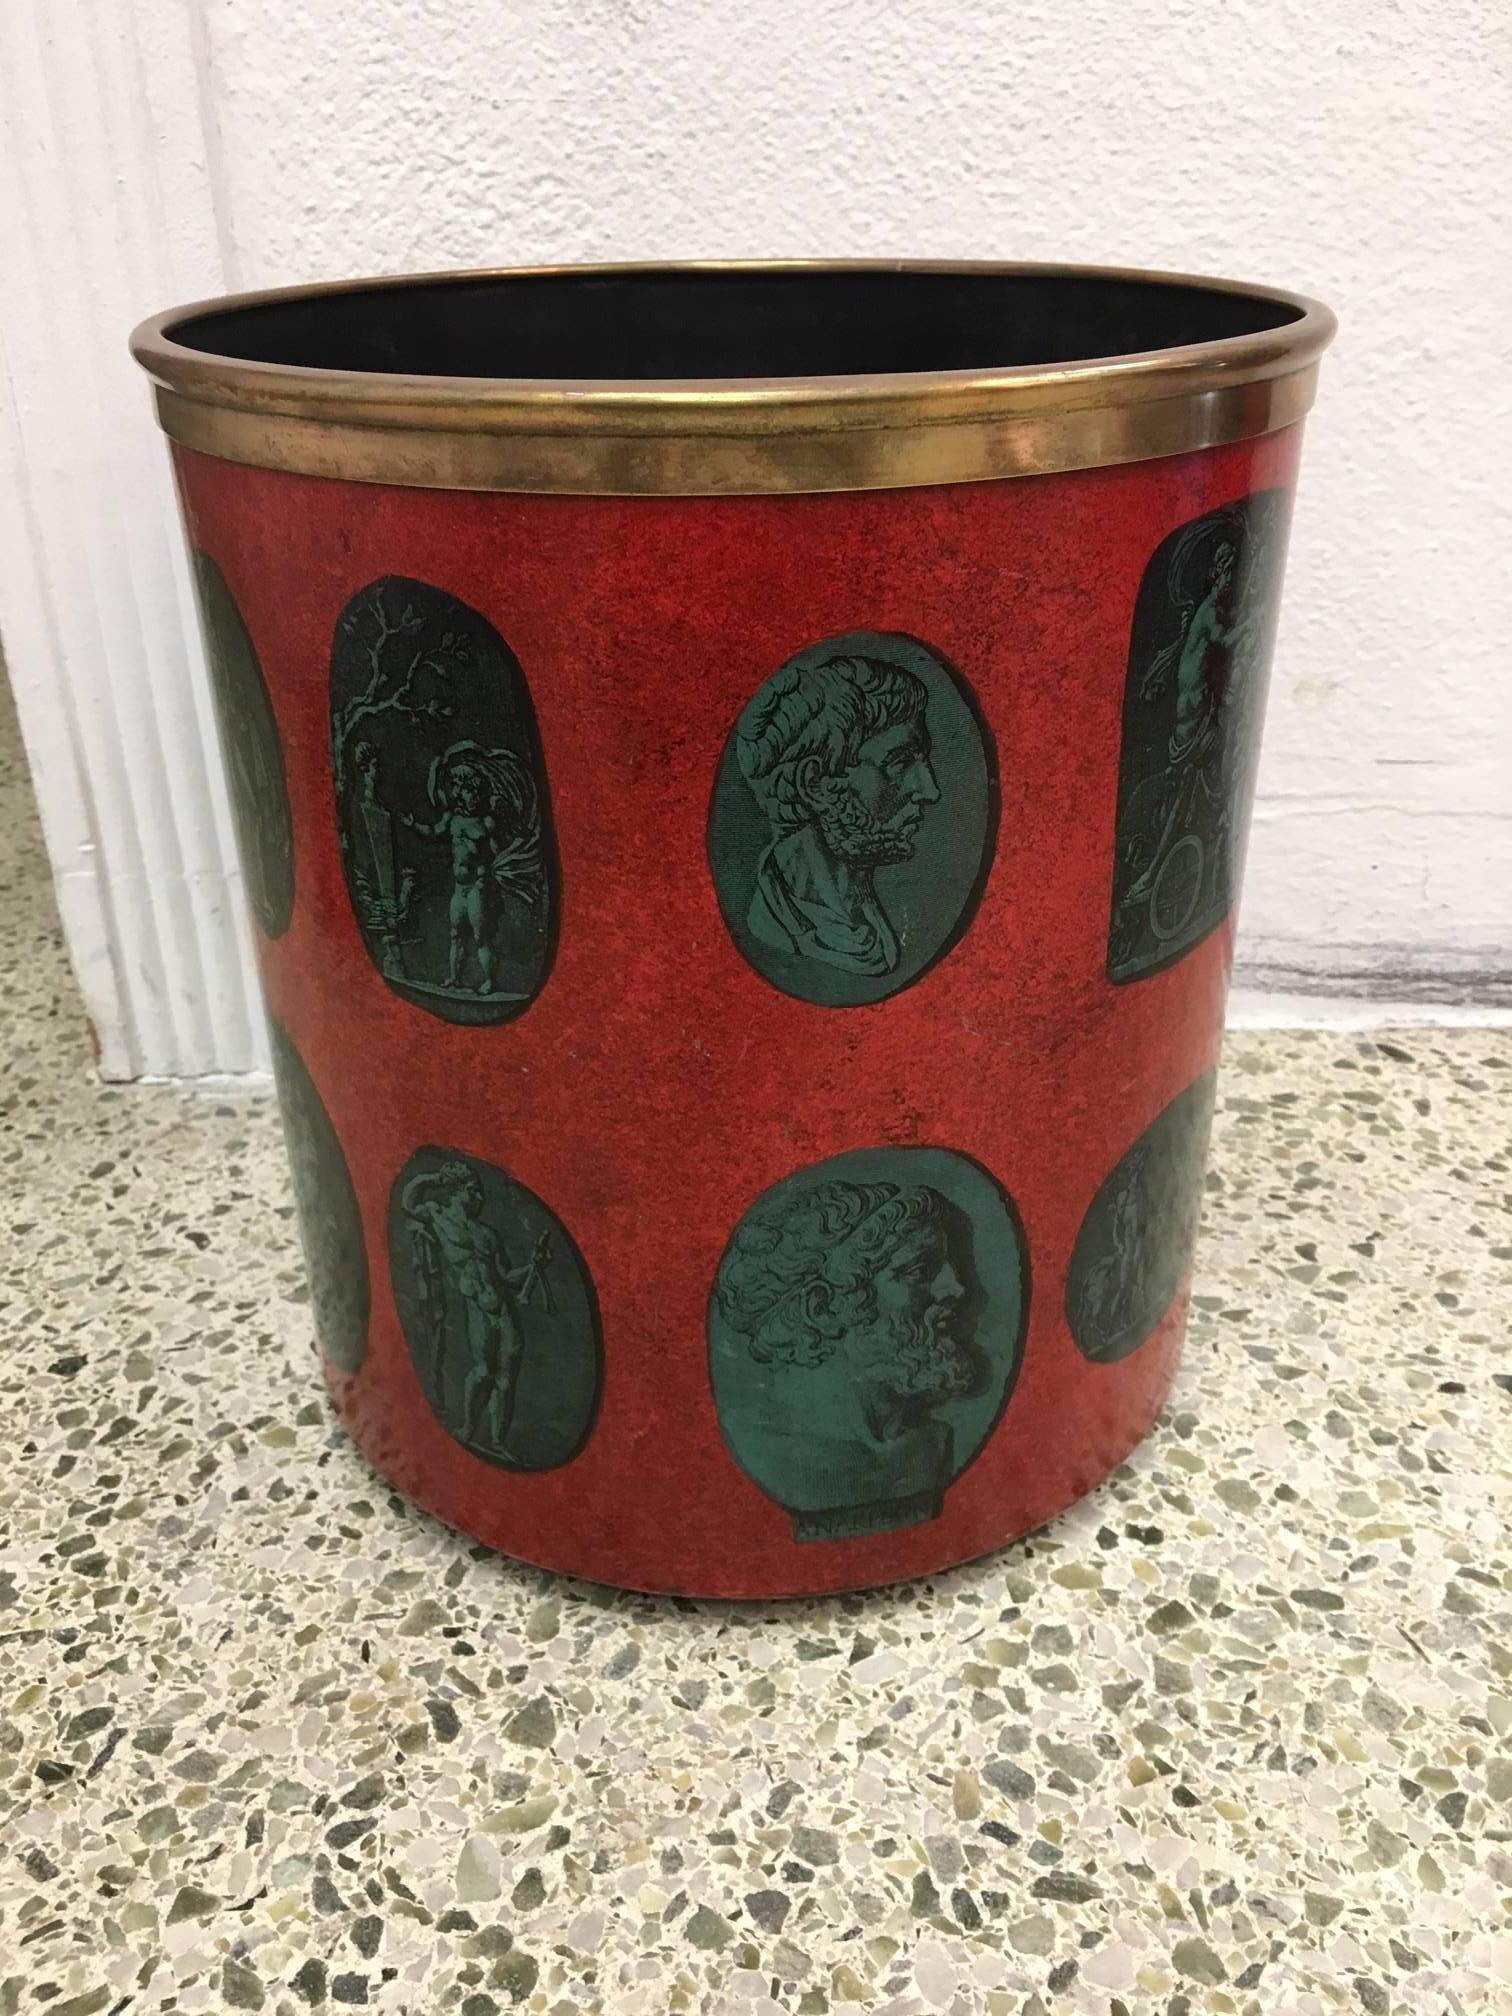 Vintage Fornasetti trash or waste can in the "Cammei" pattern.